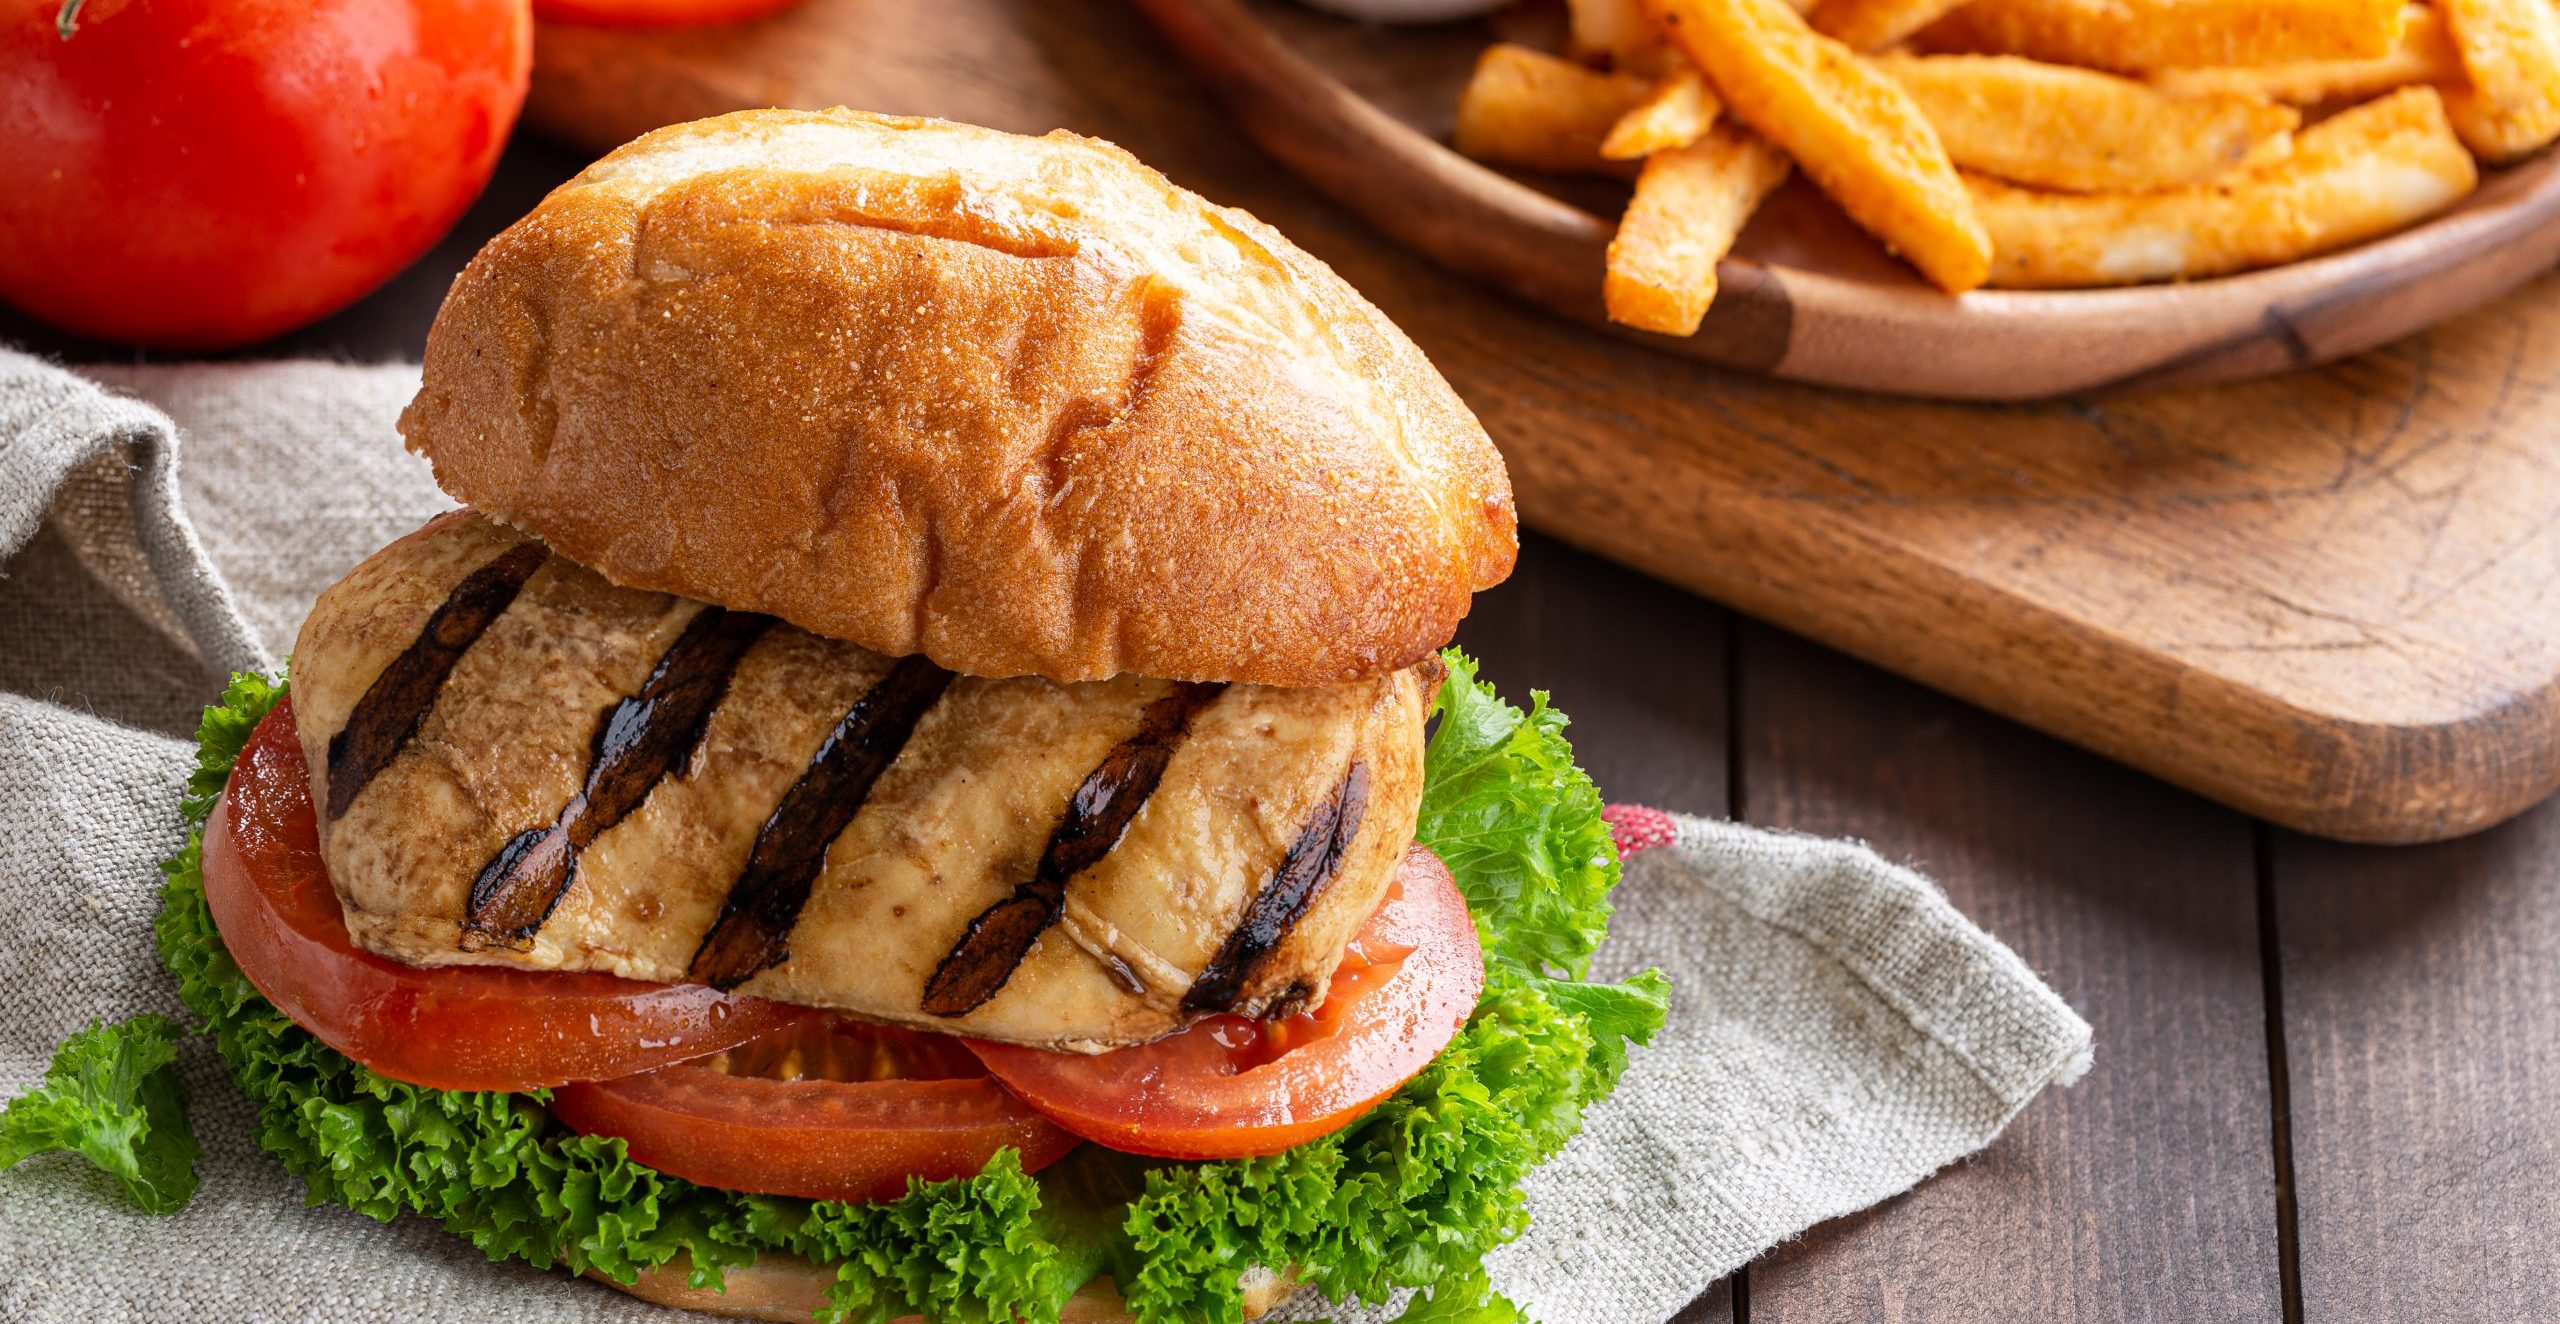 Closeup of a healthy grilled chicken breast sandwich with tomatoes and lettuce on a bun with french fries in background